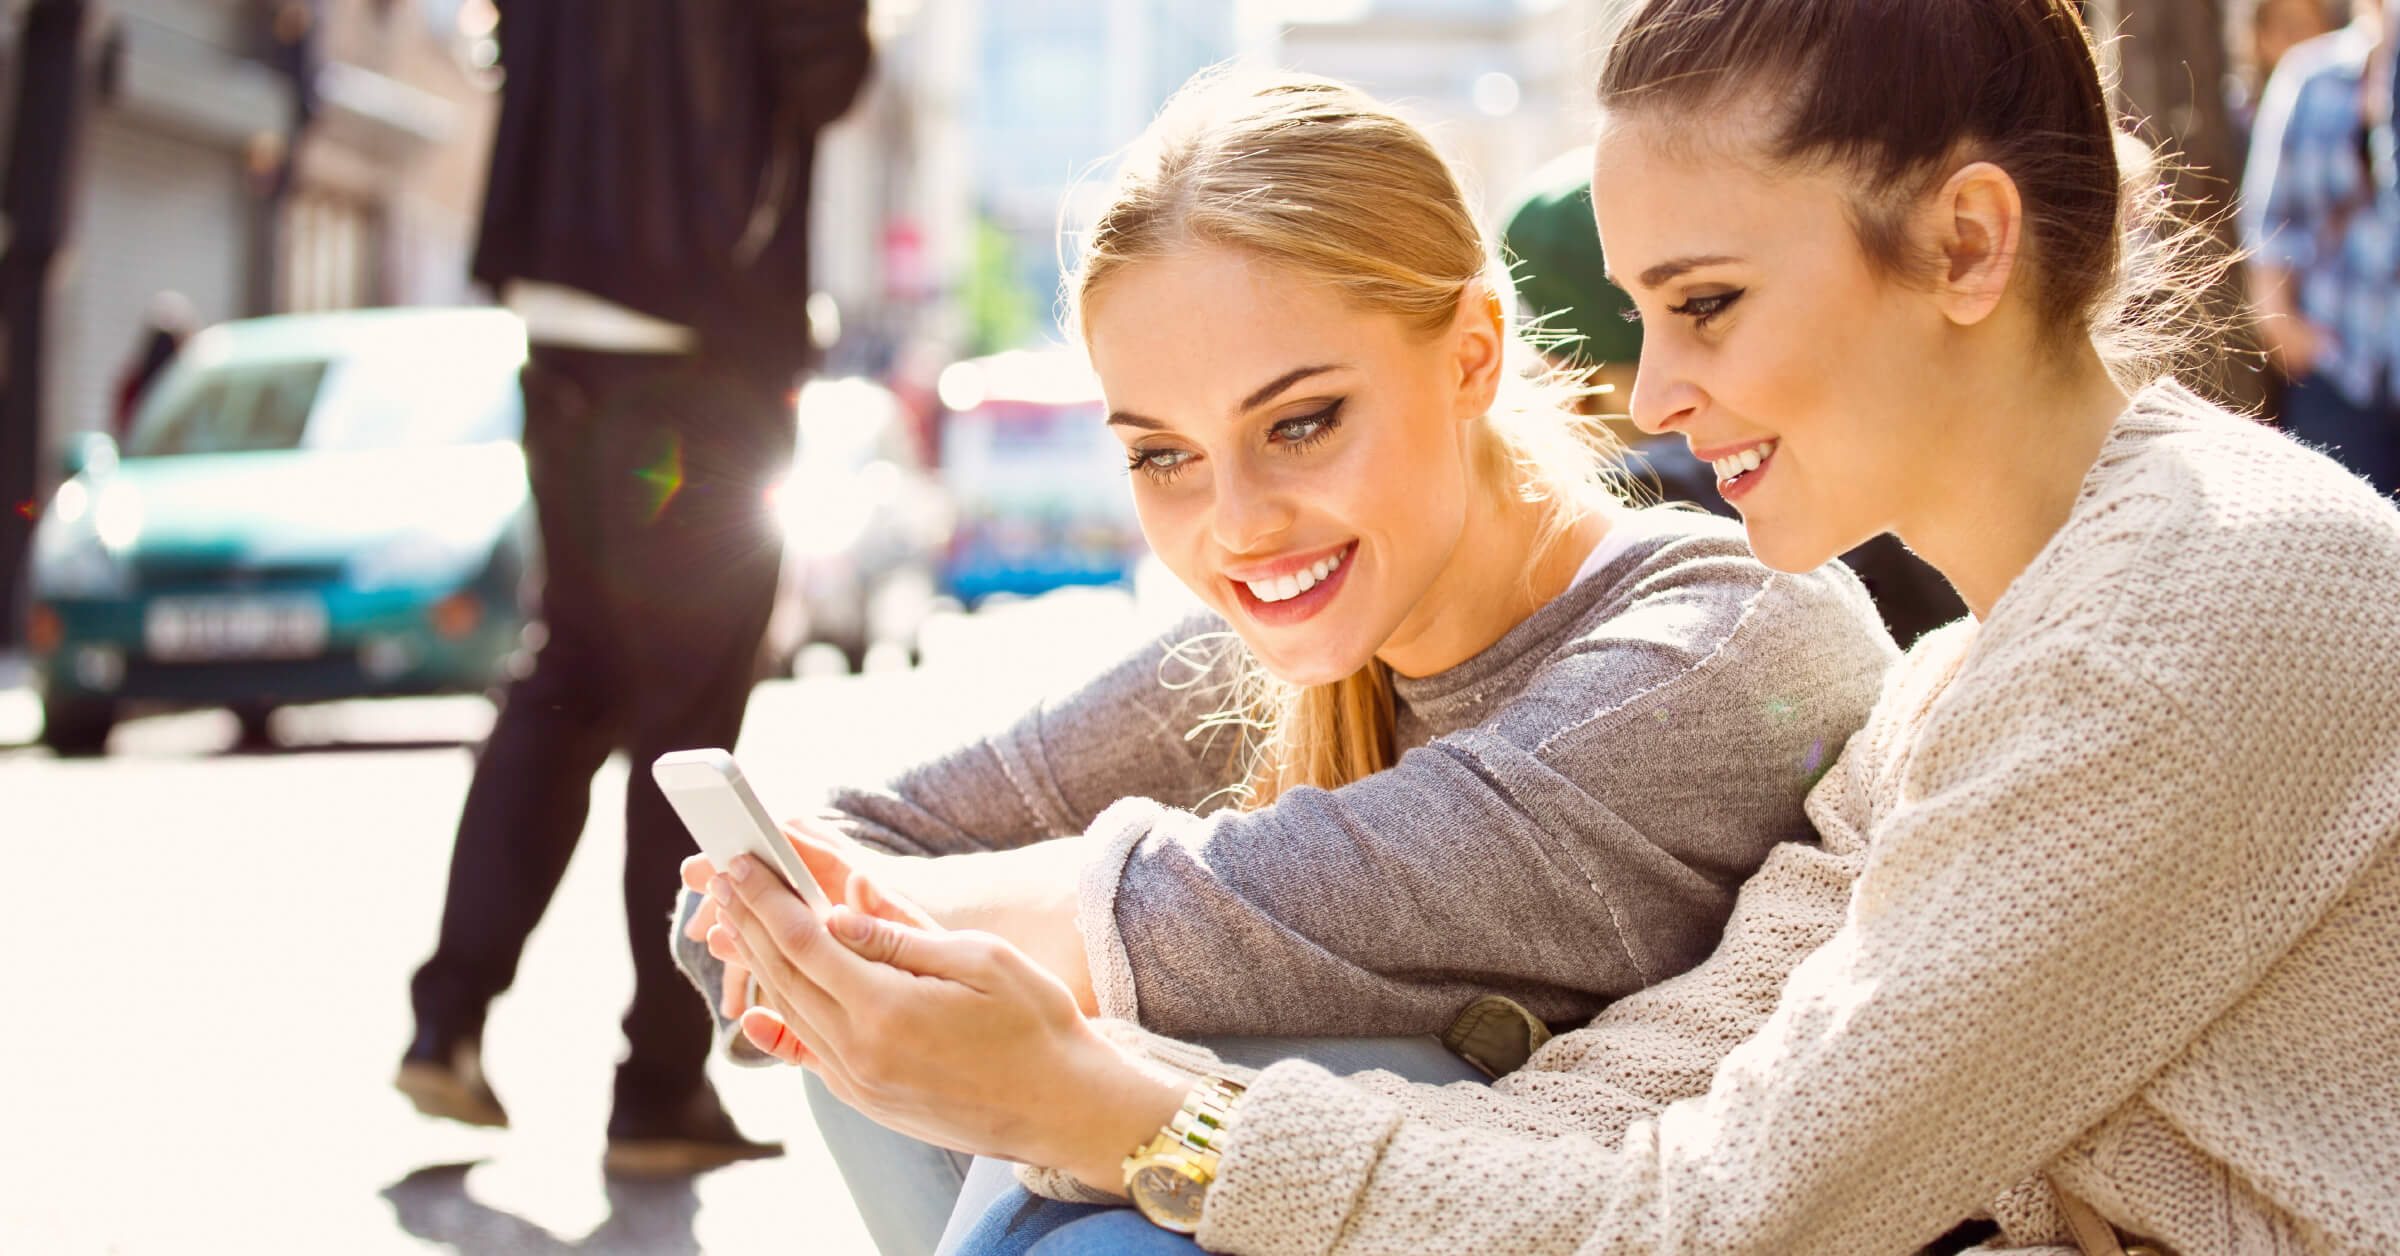 Travel Marketers Are Focused on Mobile, But Are They Considering the Entire Mobile Journey?